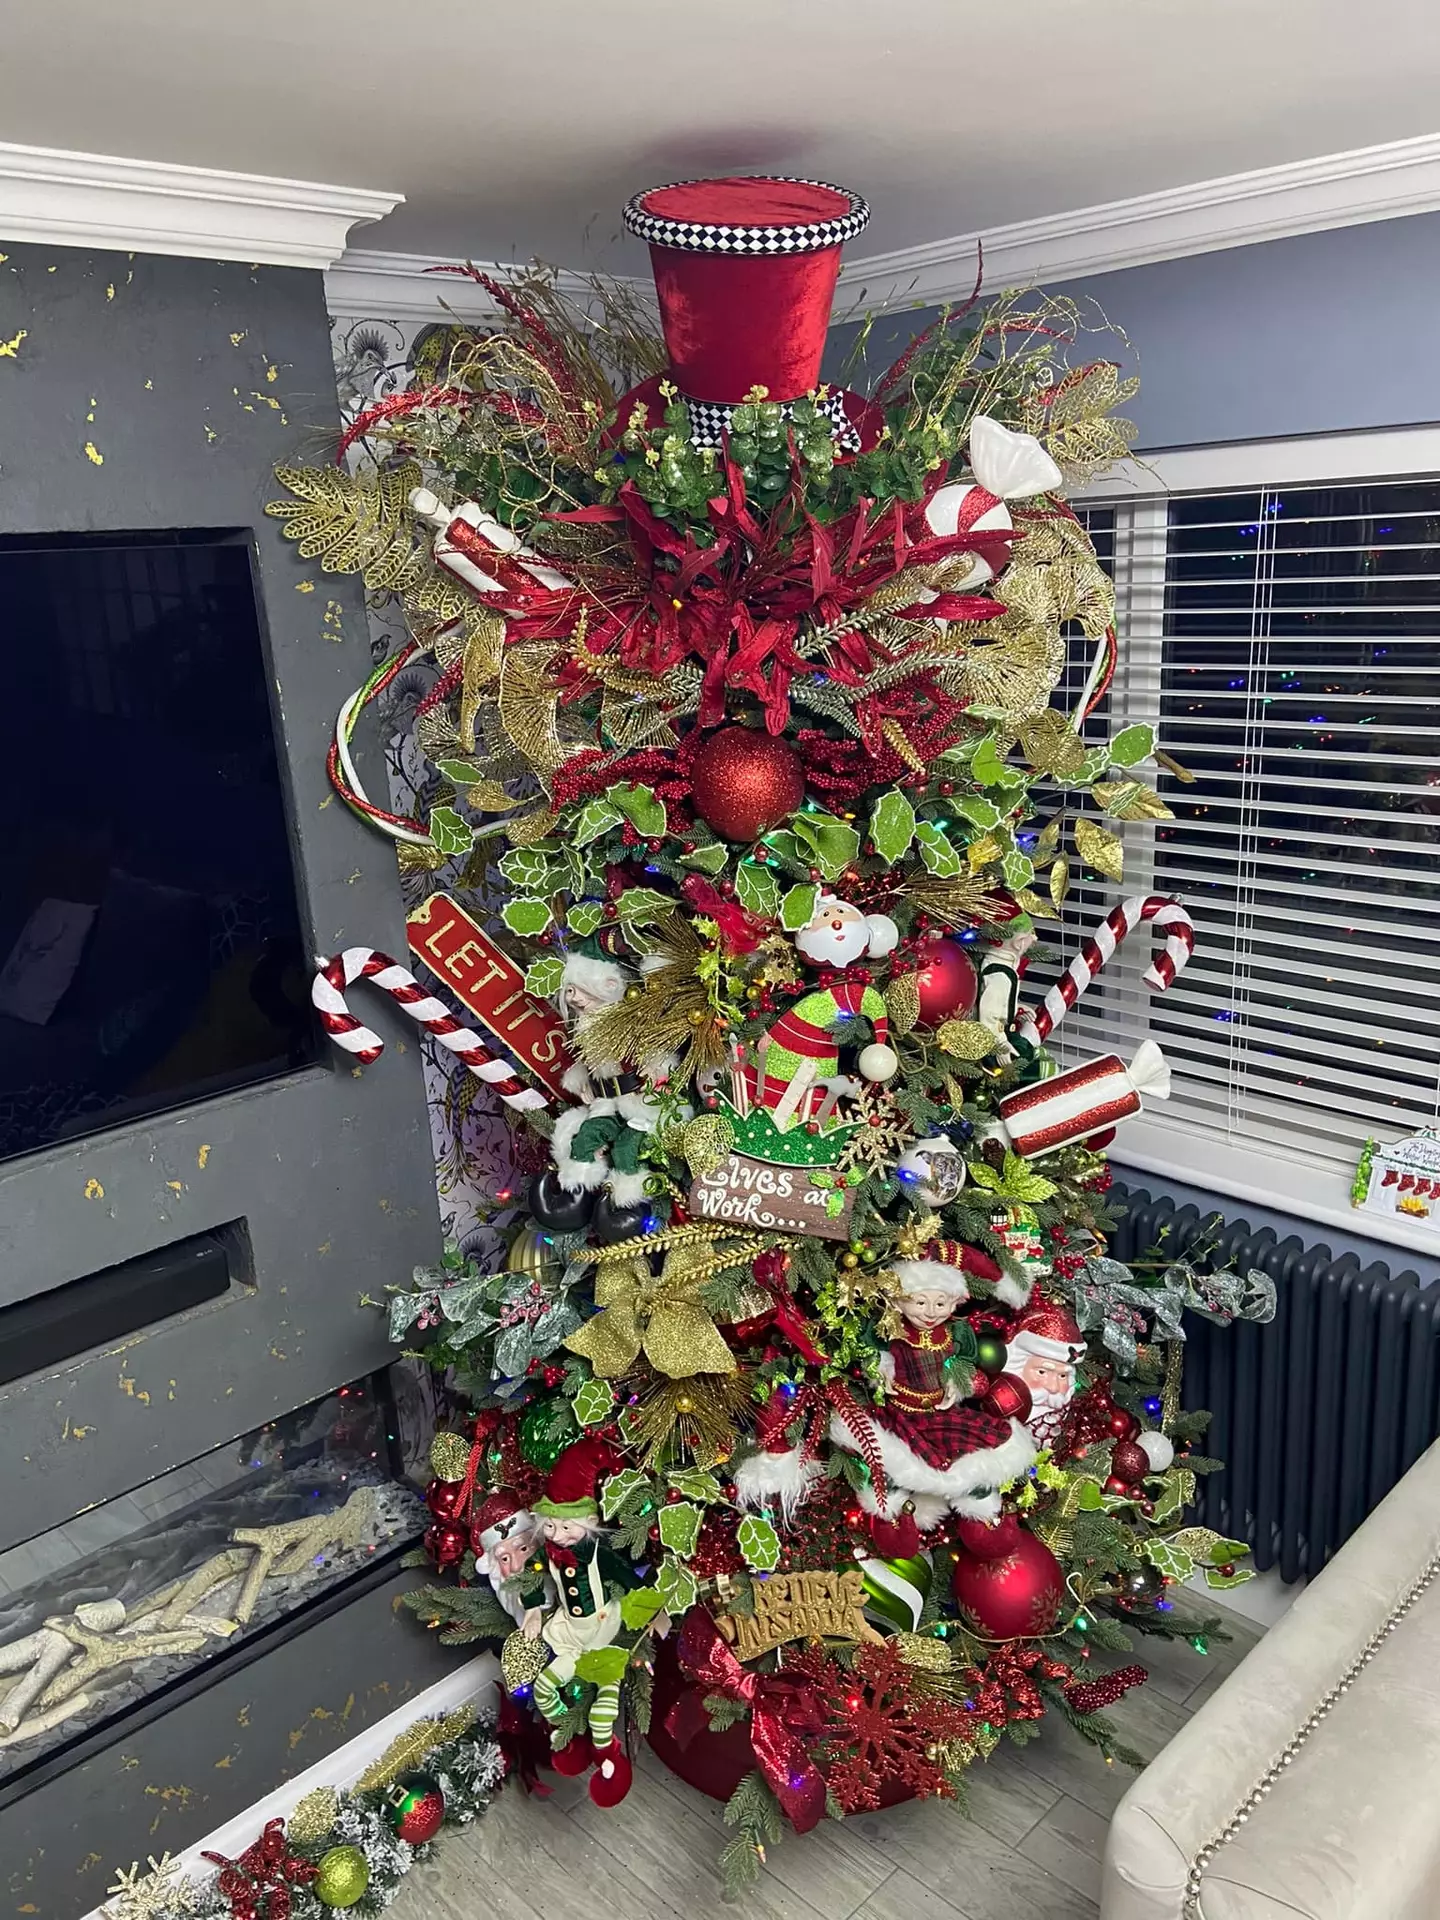 Amy shared a picture of her Christmas tree.